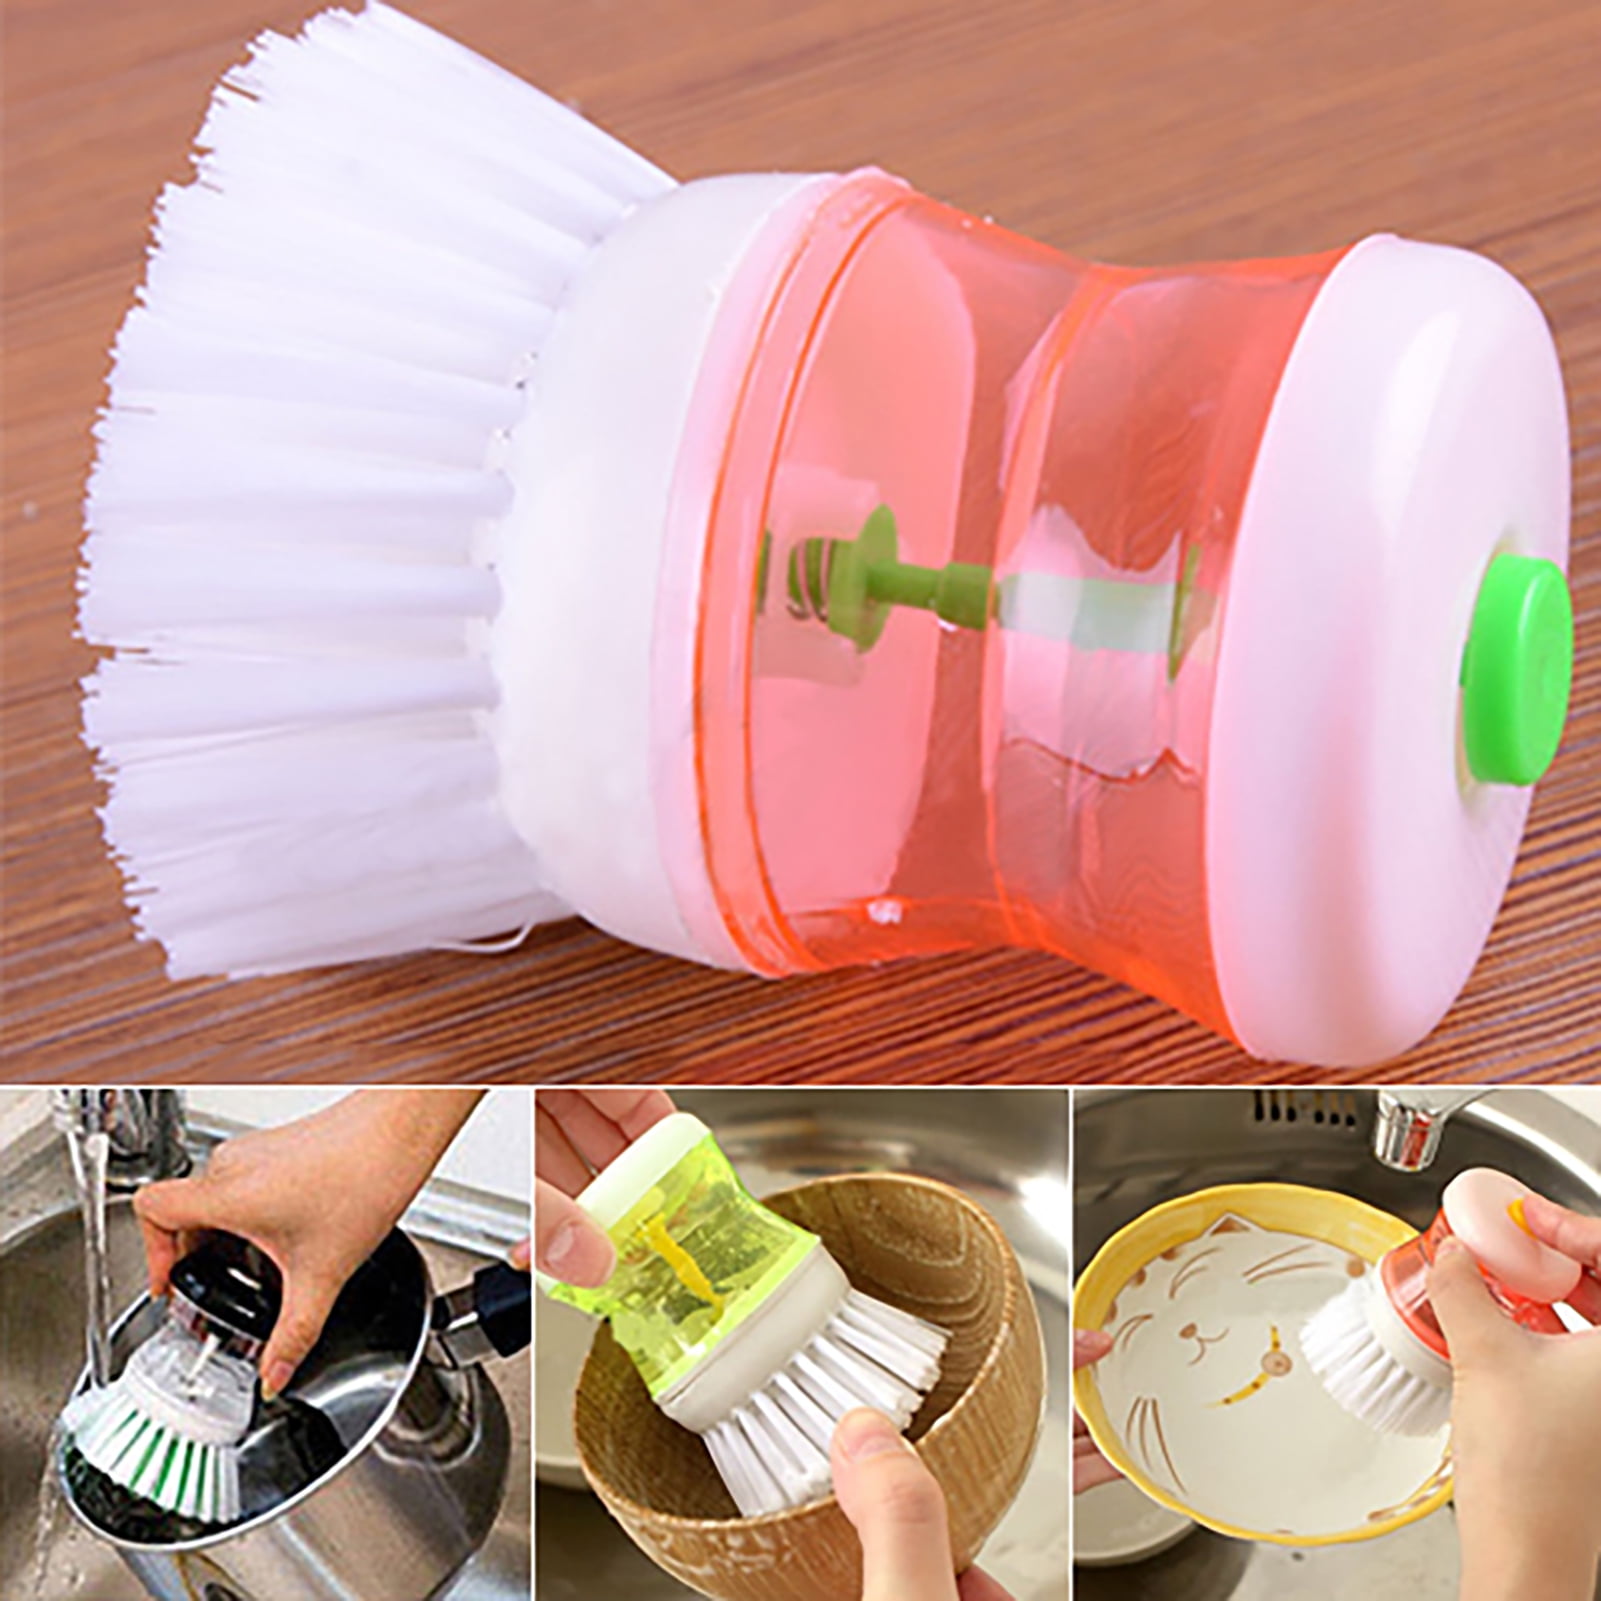 Kitchen Wash Tool Pot Pan Dish Bowl Palm Brush Scrubber Cleaning Cleaner Tool WE 